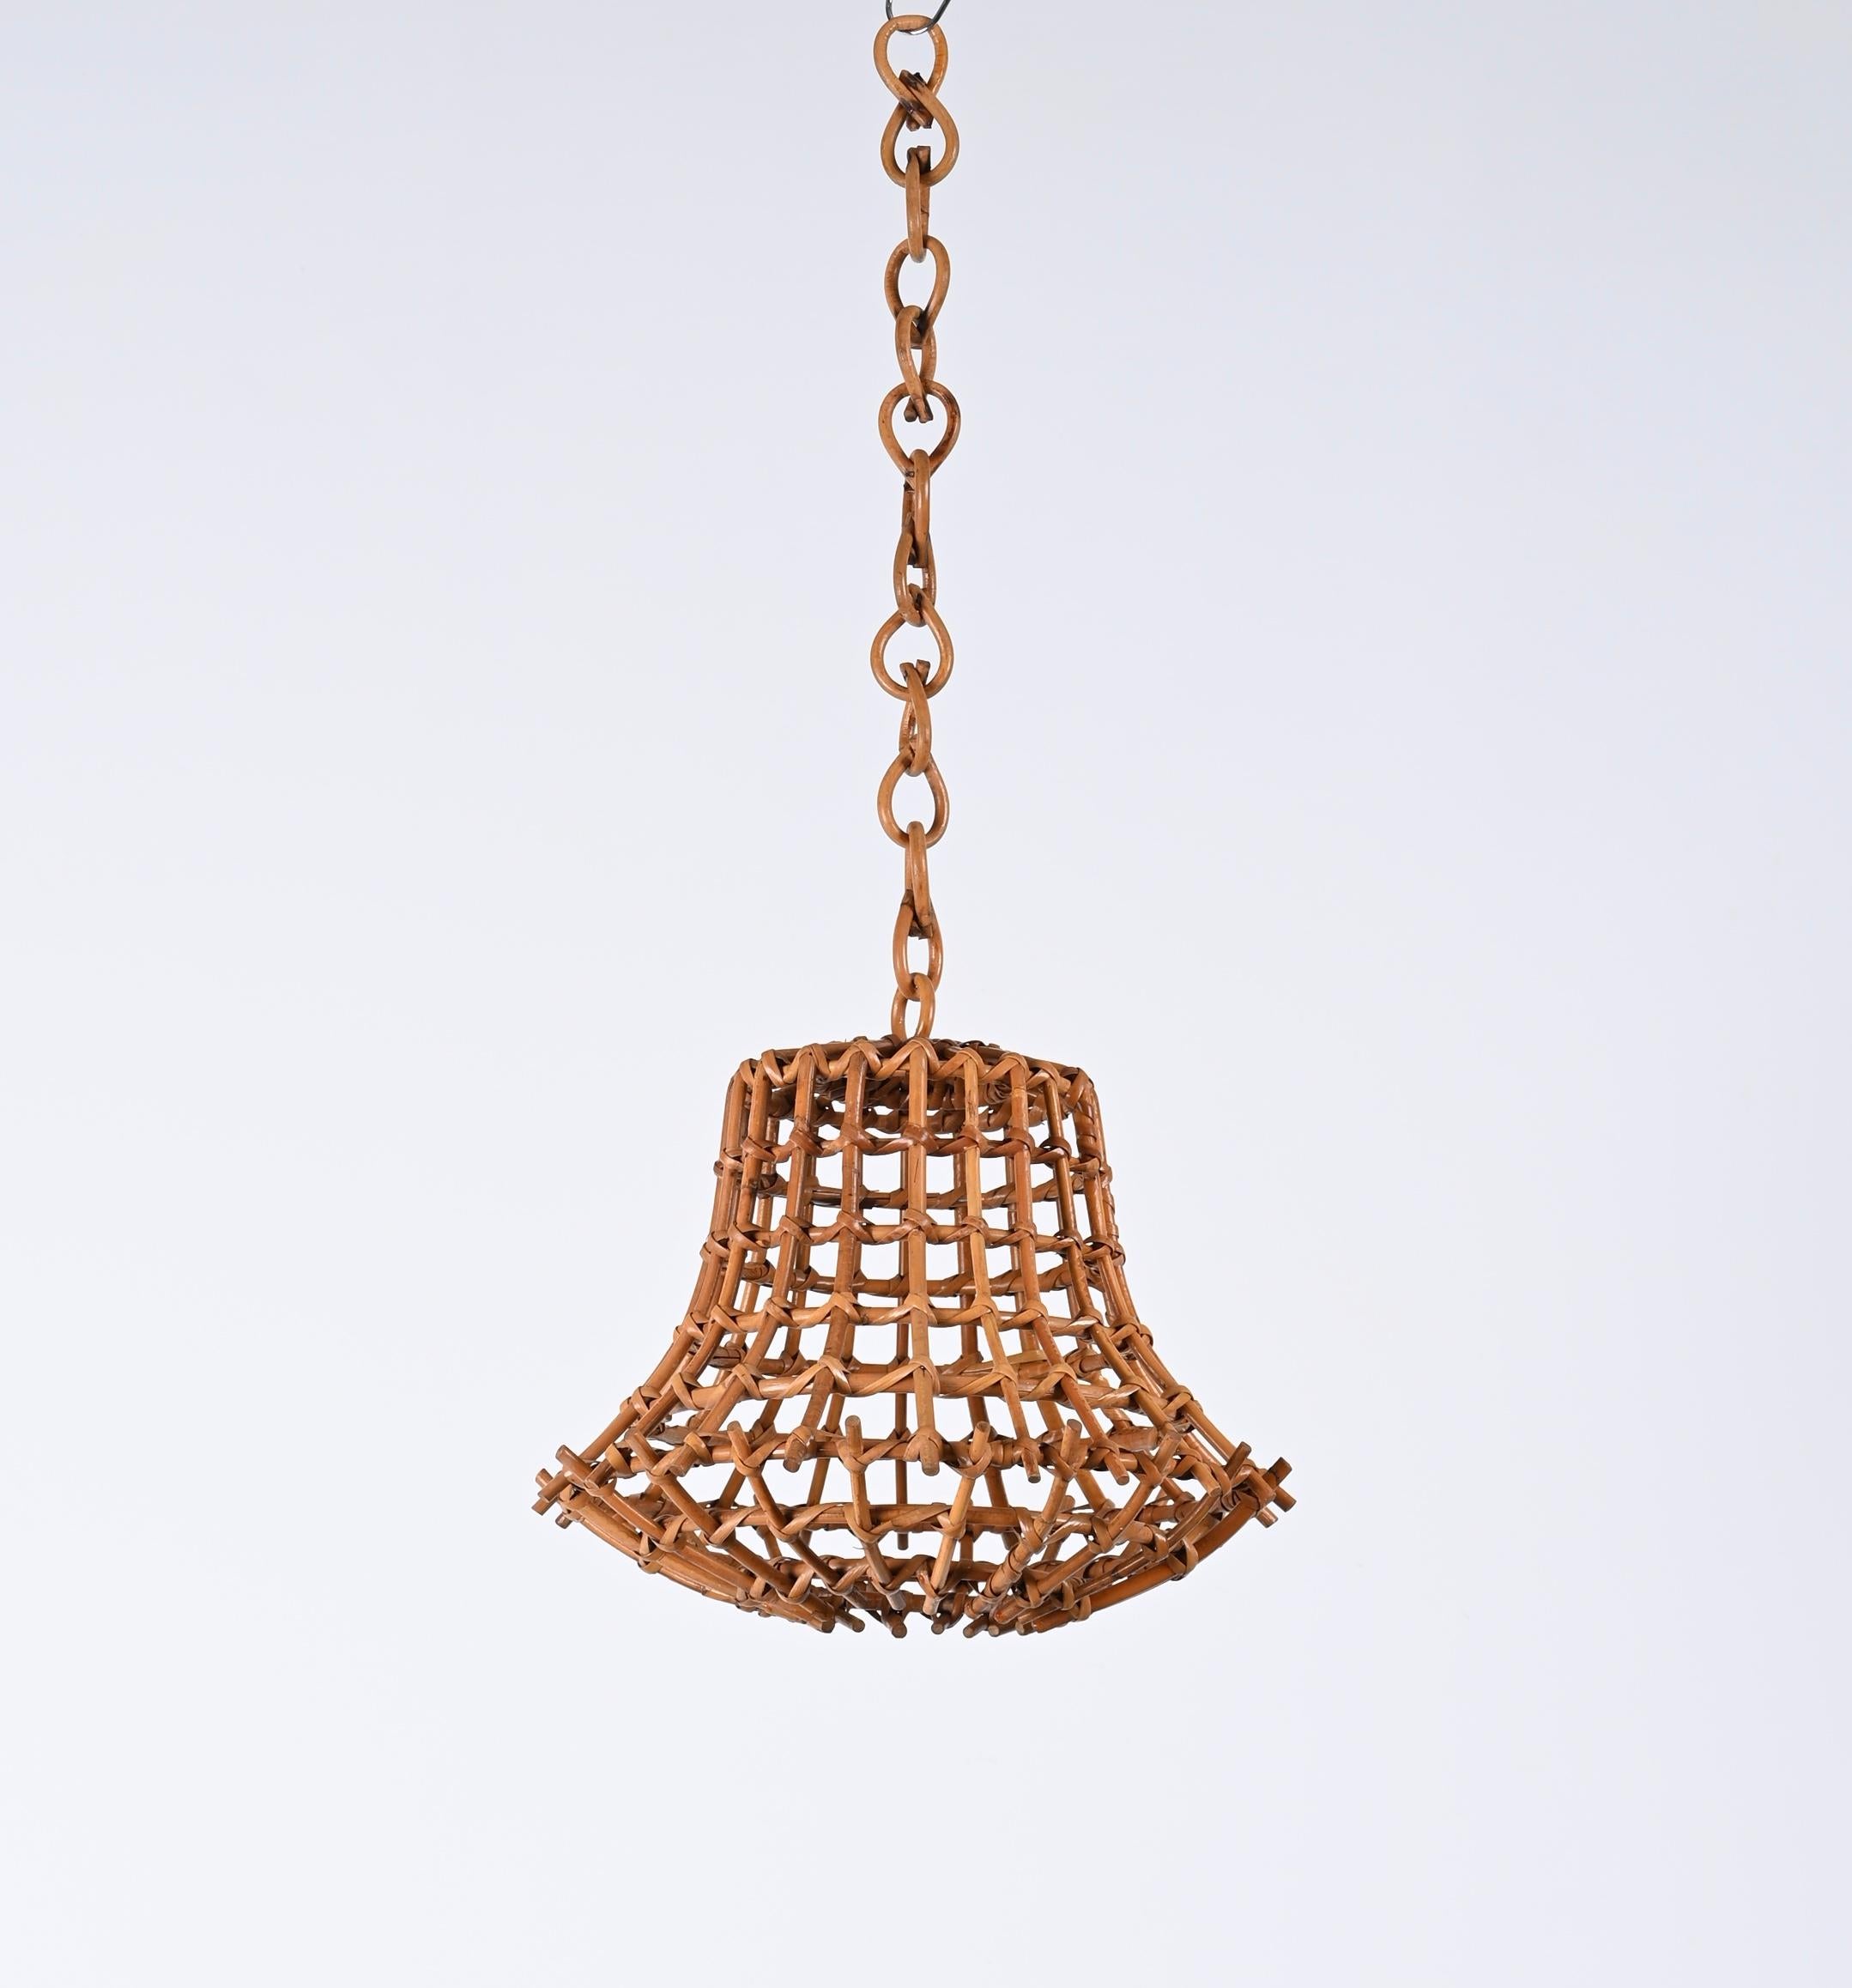 Midcentury Bamboo Cane and Rattan French Chandelier After Louis Sognot, 1960s For Sale 3